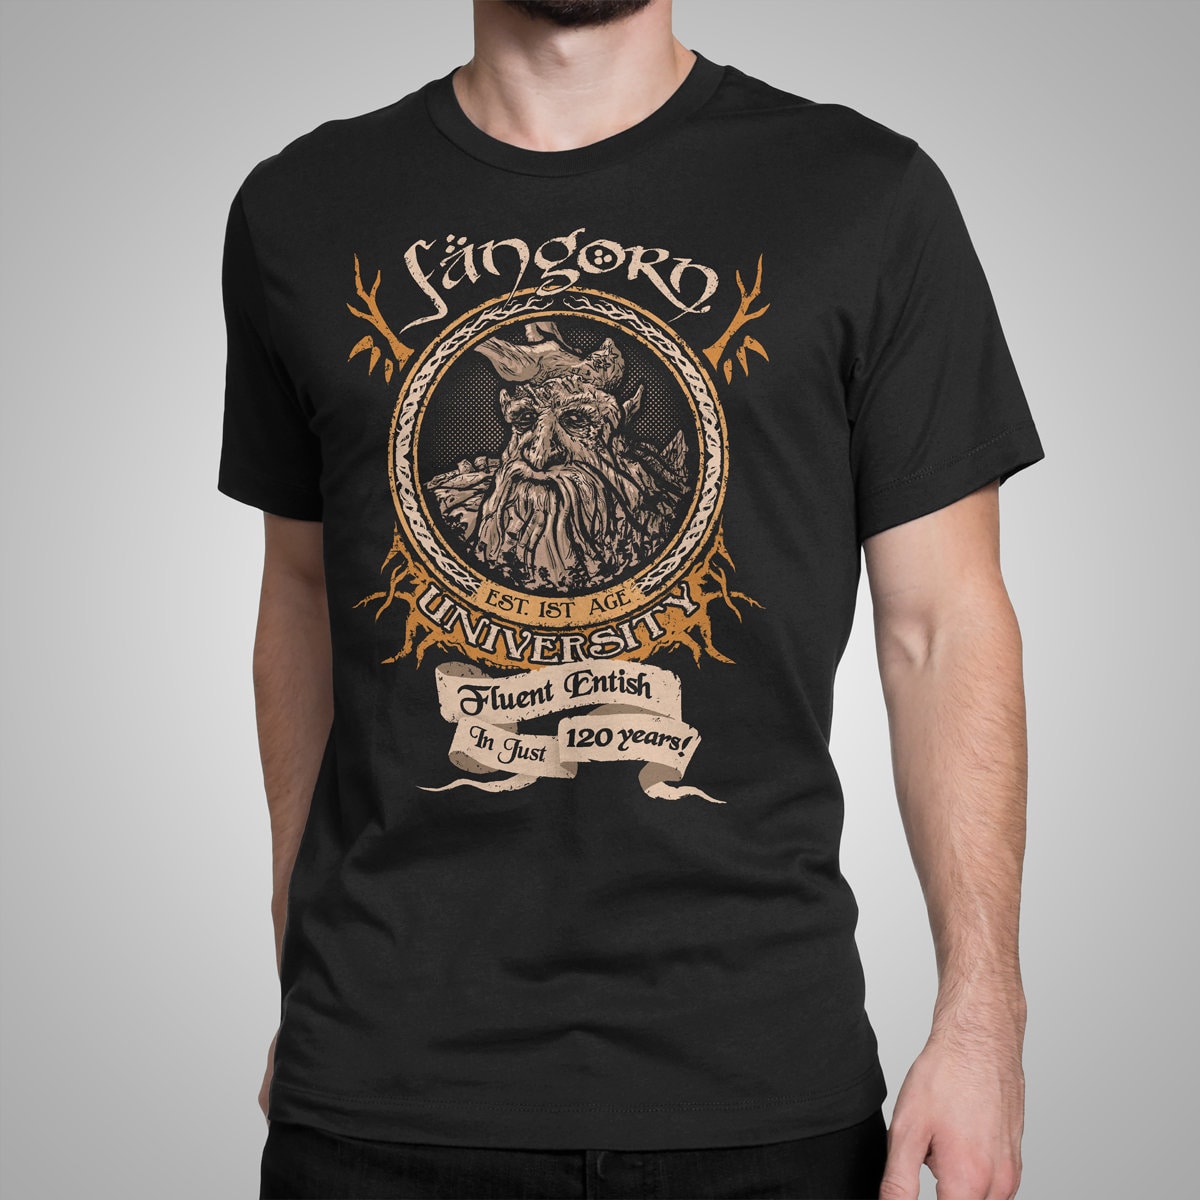 Lord of the Rings Tshirt Lord of the Rings T Shirt Lord of the Rings ...